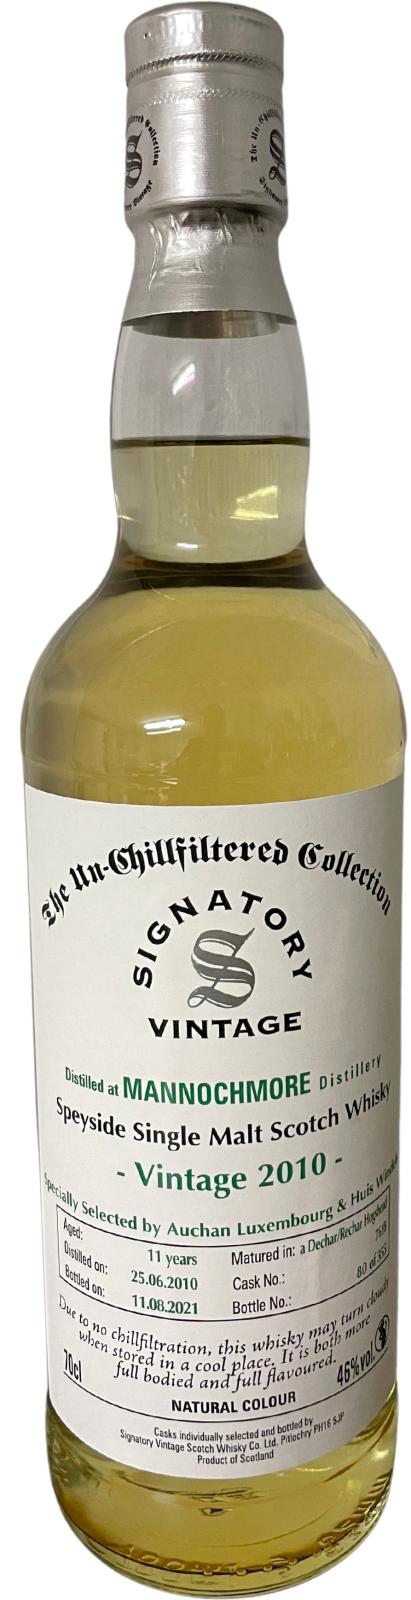 Mannochmore 2010 SV The Un-Chillfiltered Collection 11 Year Old 2021 Release (Cask #7618) Single Malt Scotch Whisky | 700ML